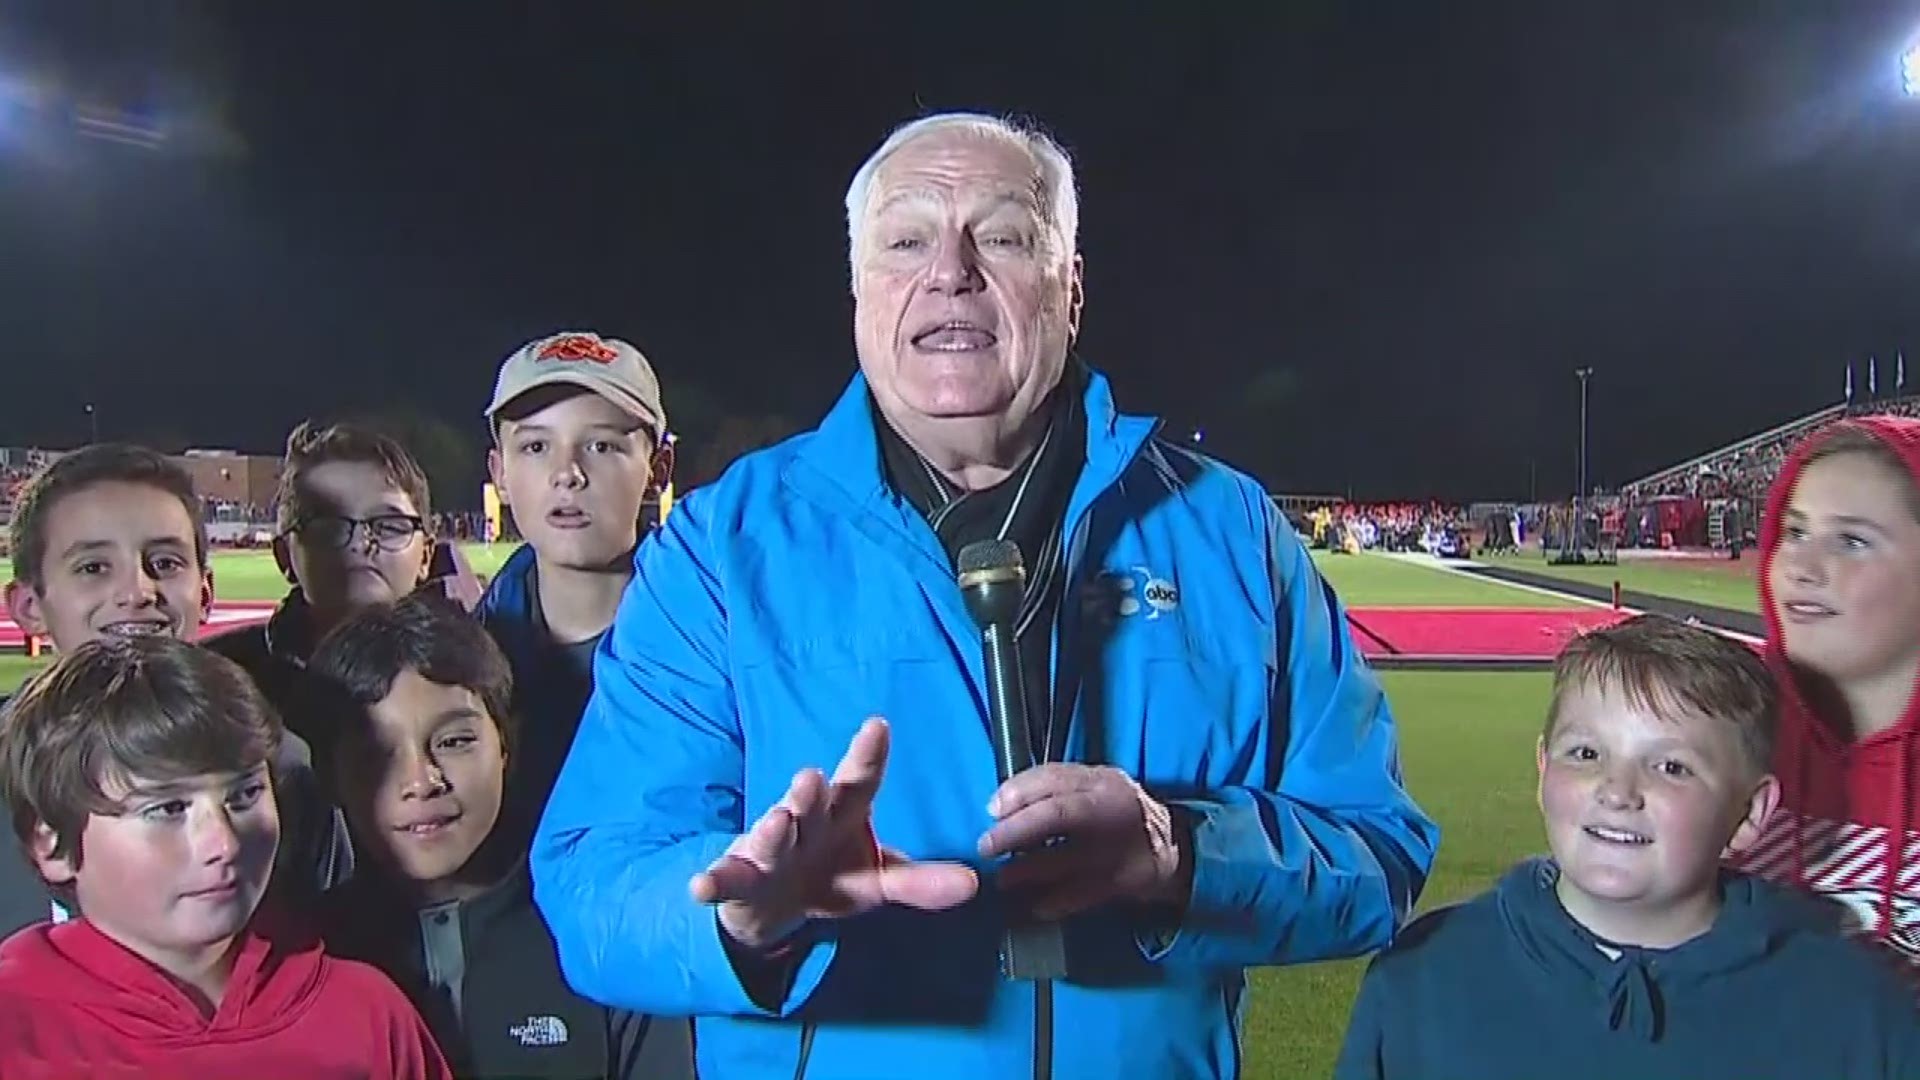 #GAMEOFTHEWEEK: It's Friday night and Dale Hansen is at our game of the week: Celina at Argyle. We will be live from high school football games all season.